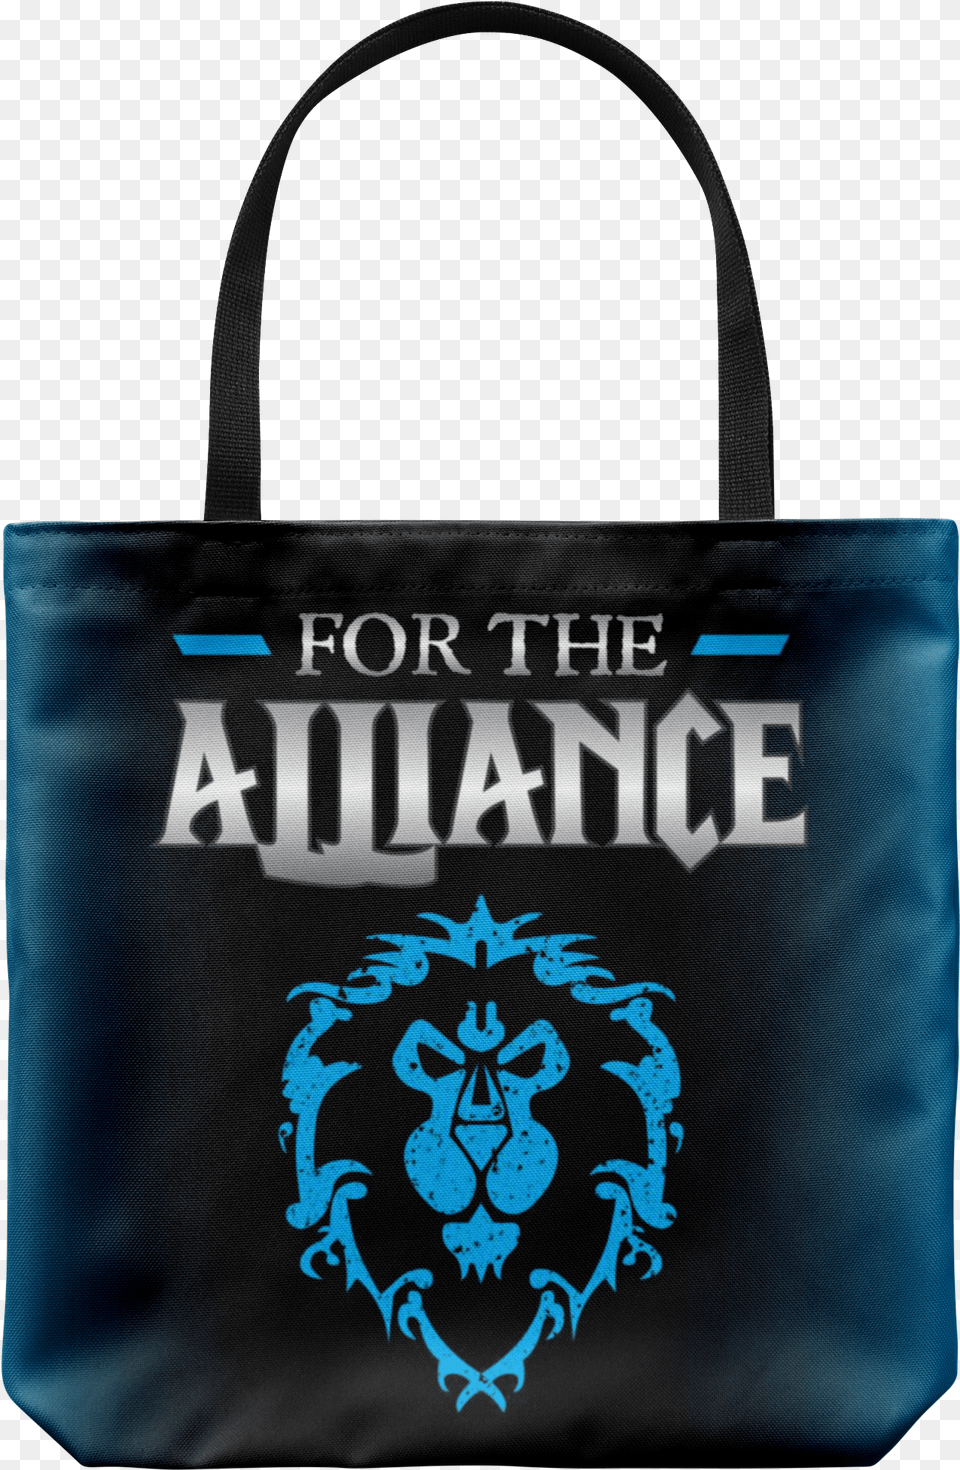 World Of Warcraft Quotfor The Alliance Warcraft Horde And Alliance, Accessories, Bag, Handbag, Tote Bag Free Png Download